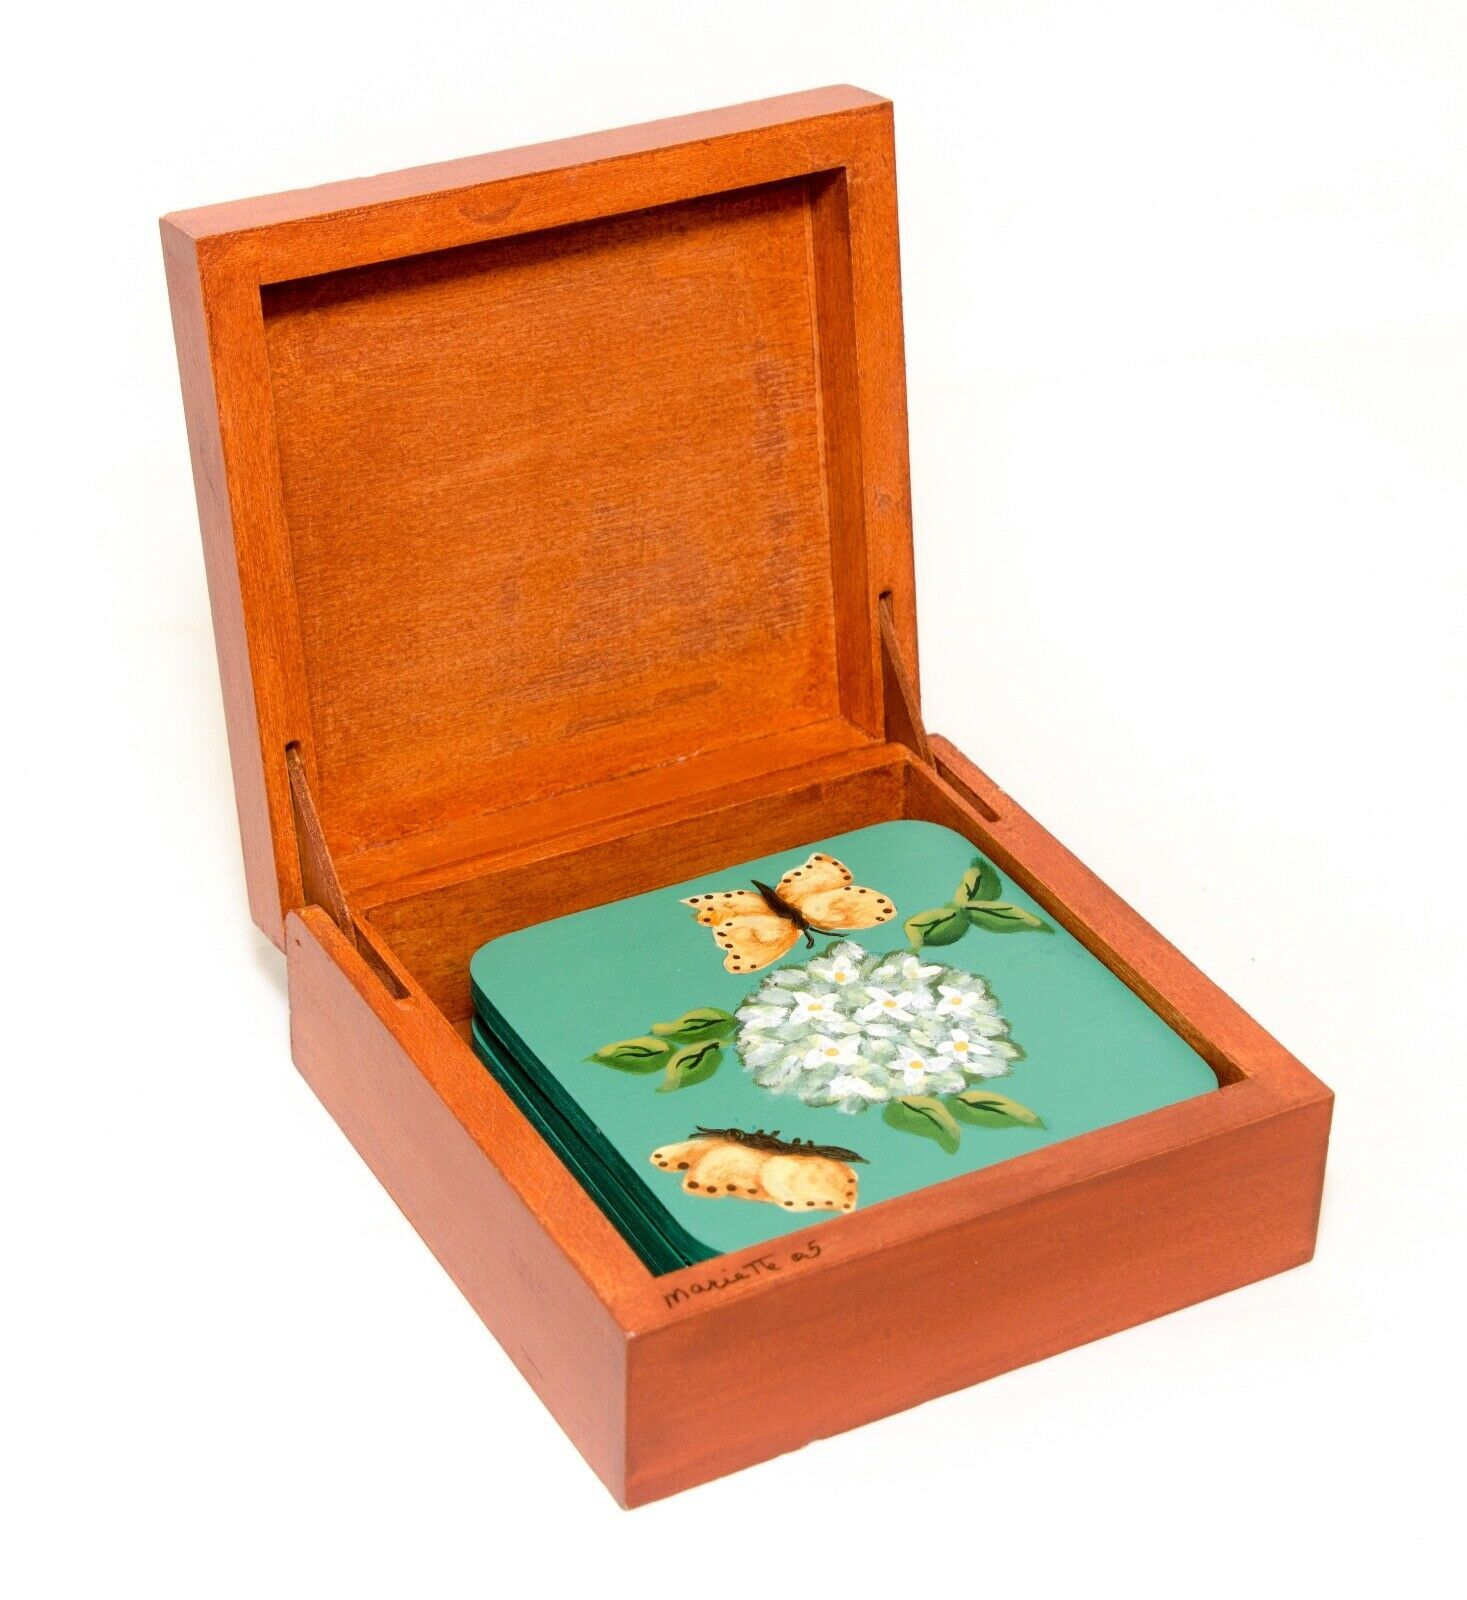 Wood Coaster Set With Wooden Storage Box Set 4 Coasters Butterfly Hand Made - $14.82